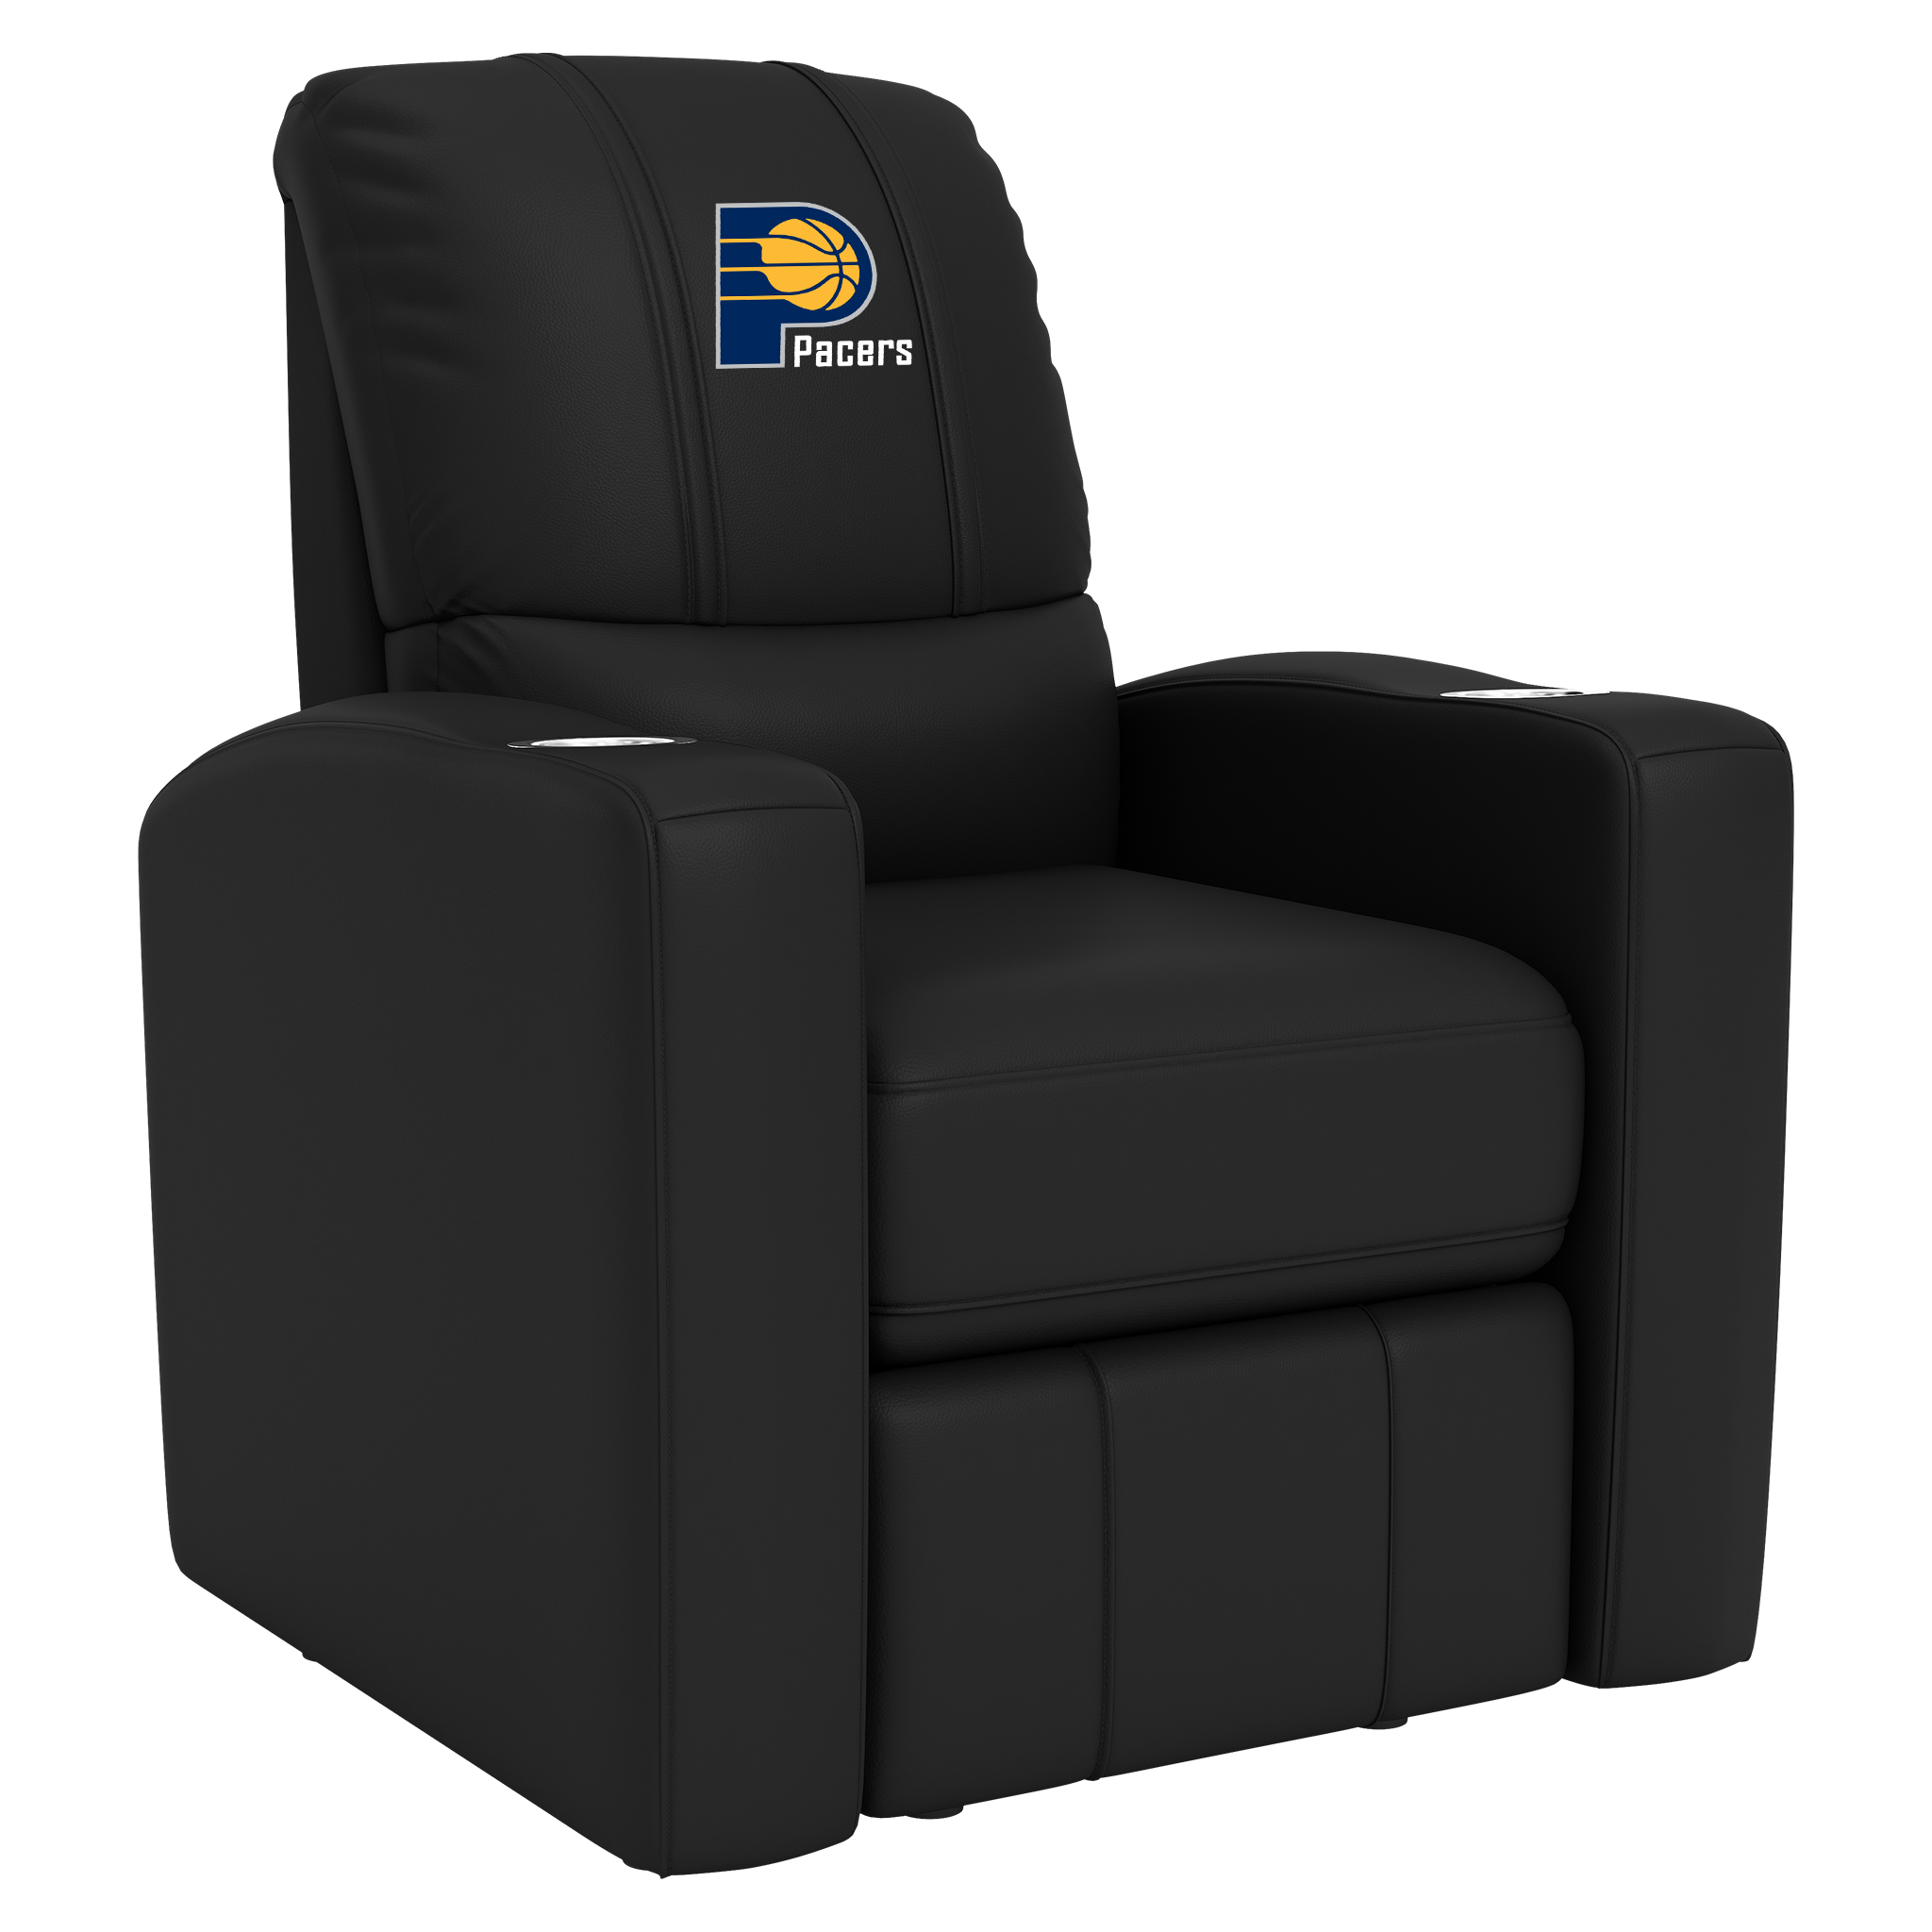 Indiana Pacers Stealth Recliner with Indiana Pacers Logo